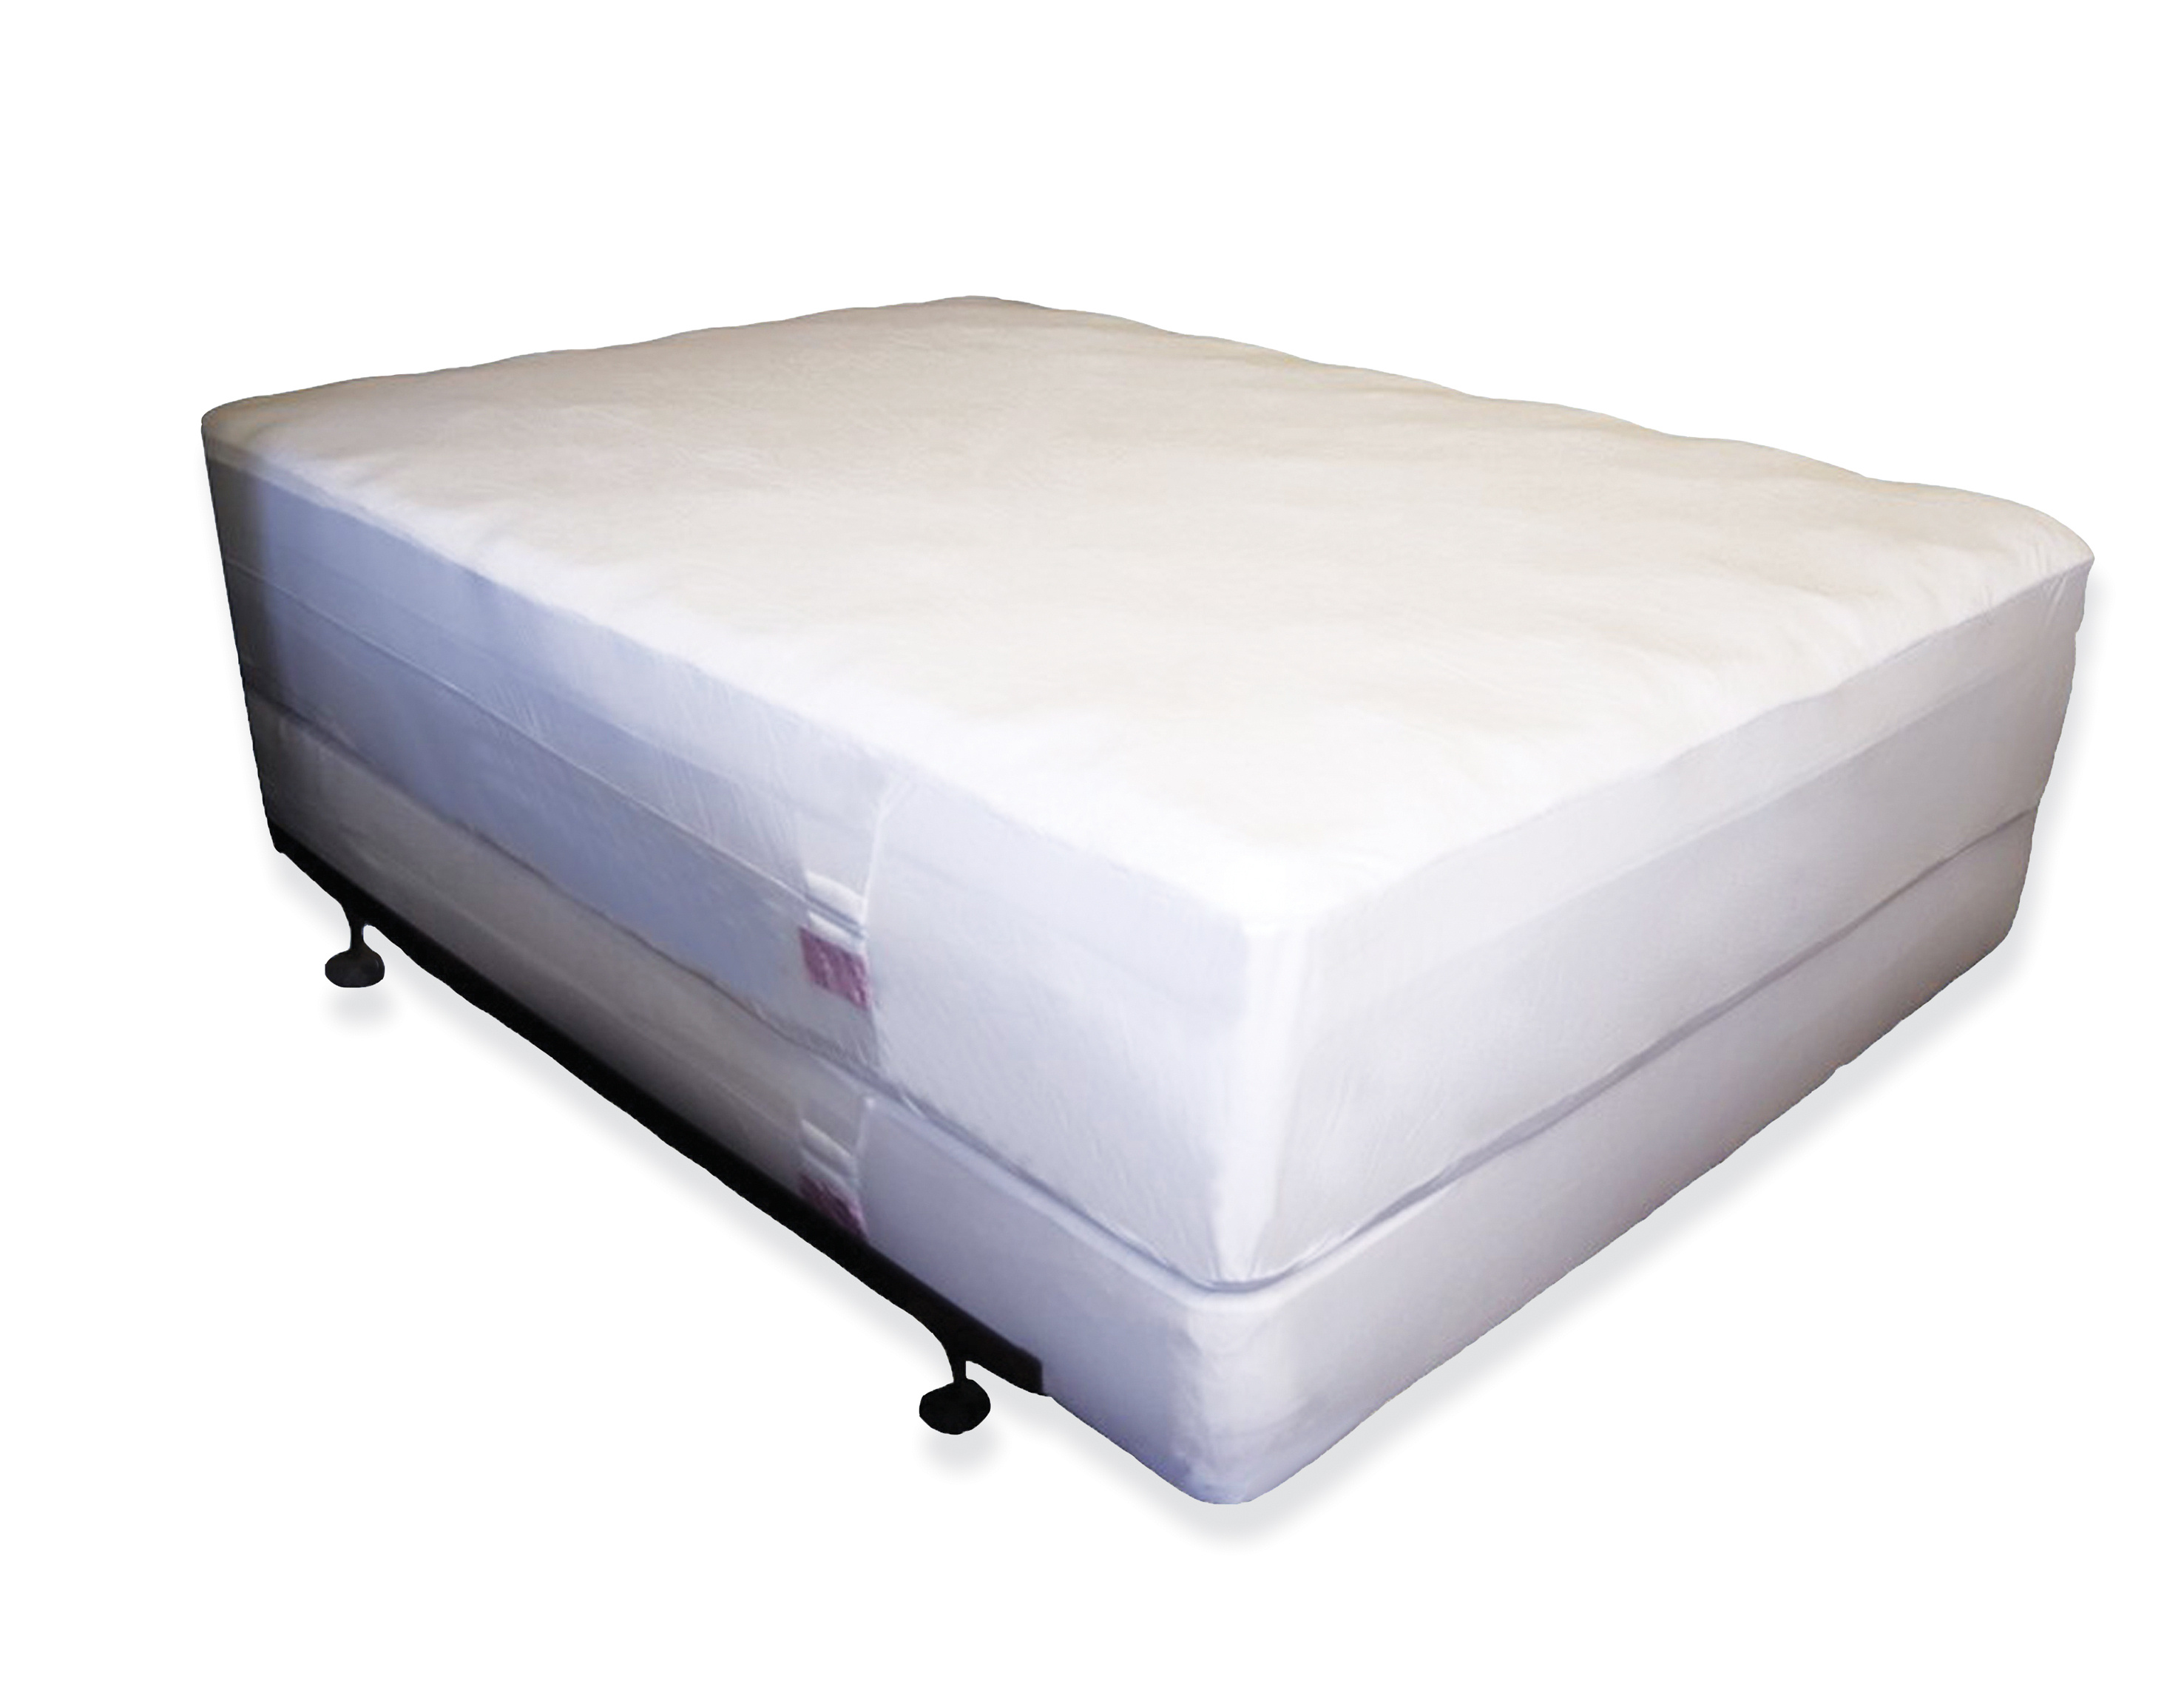 mattress protector protect from bed bugs